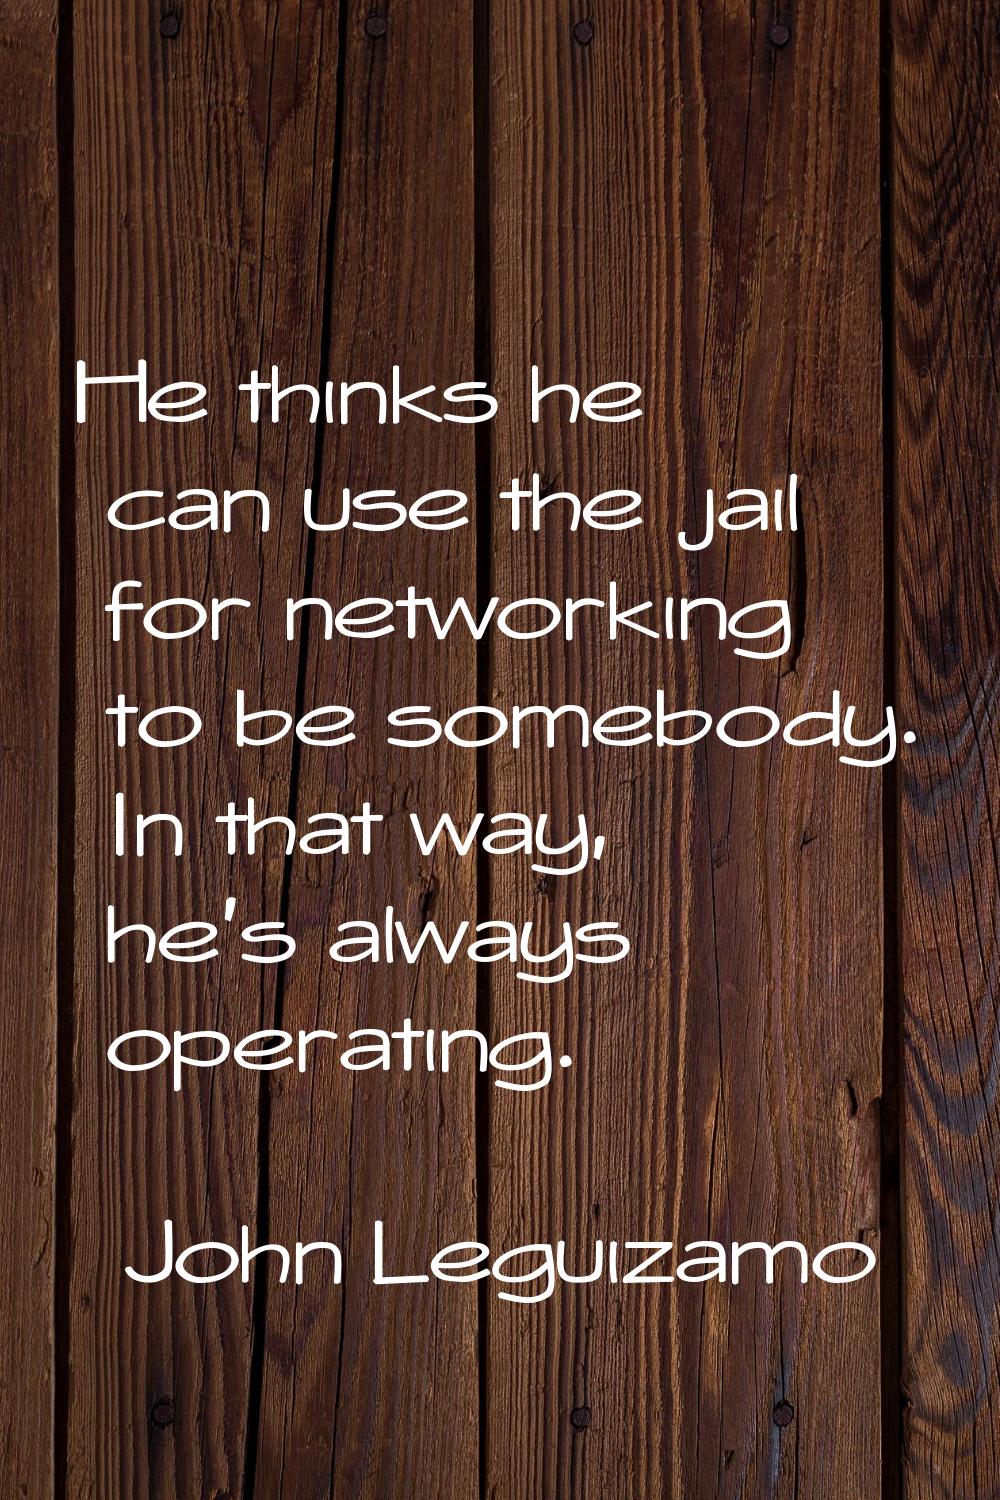 He thinks he can use the jail for networking to be somebody. In that way, he's always operating.